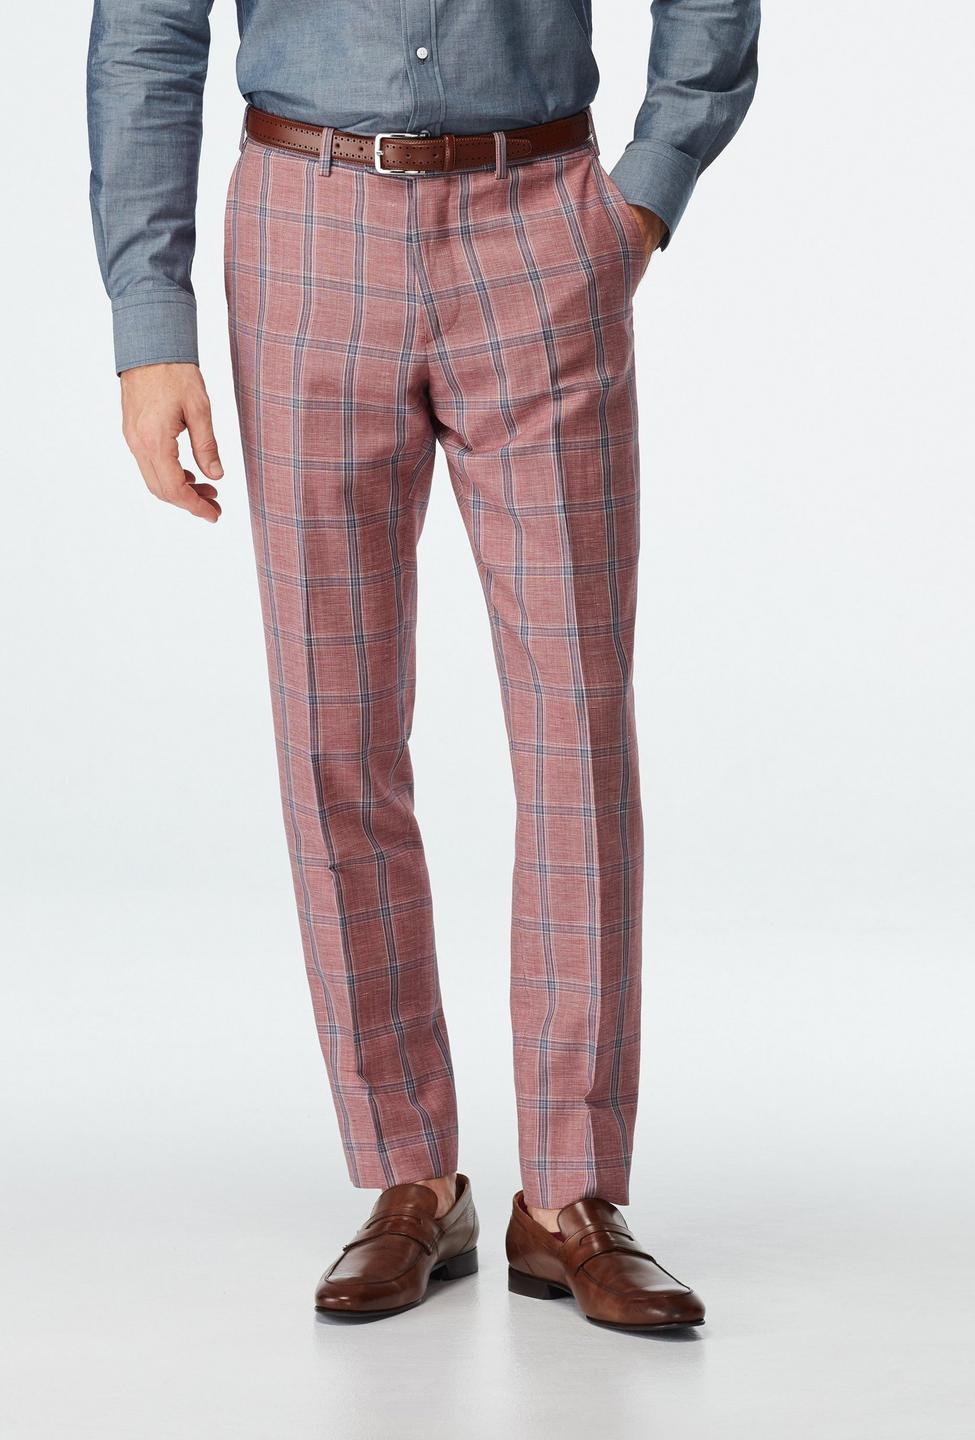 Red pants - Southwell Plaid Design from Seasonal Indochino Collection